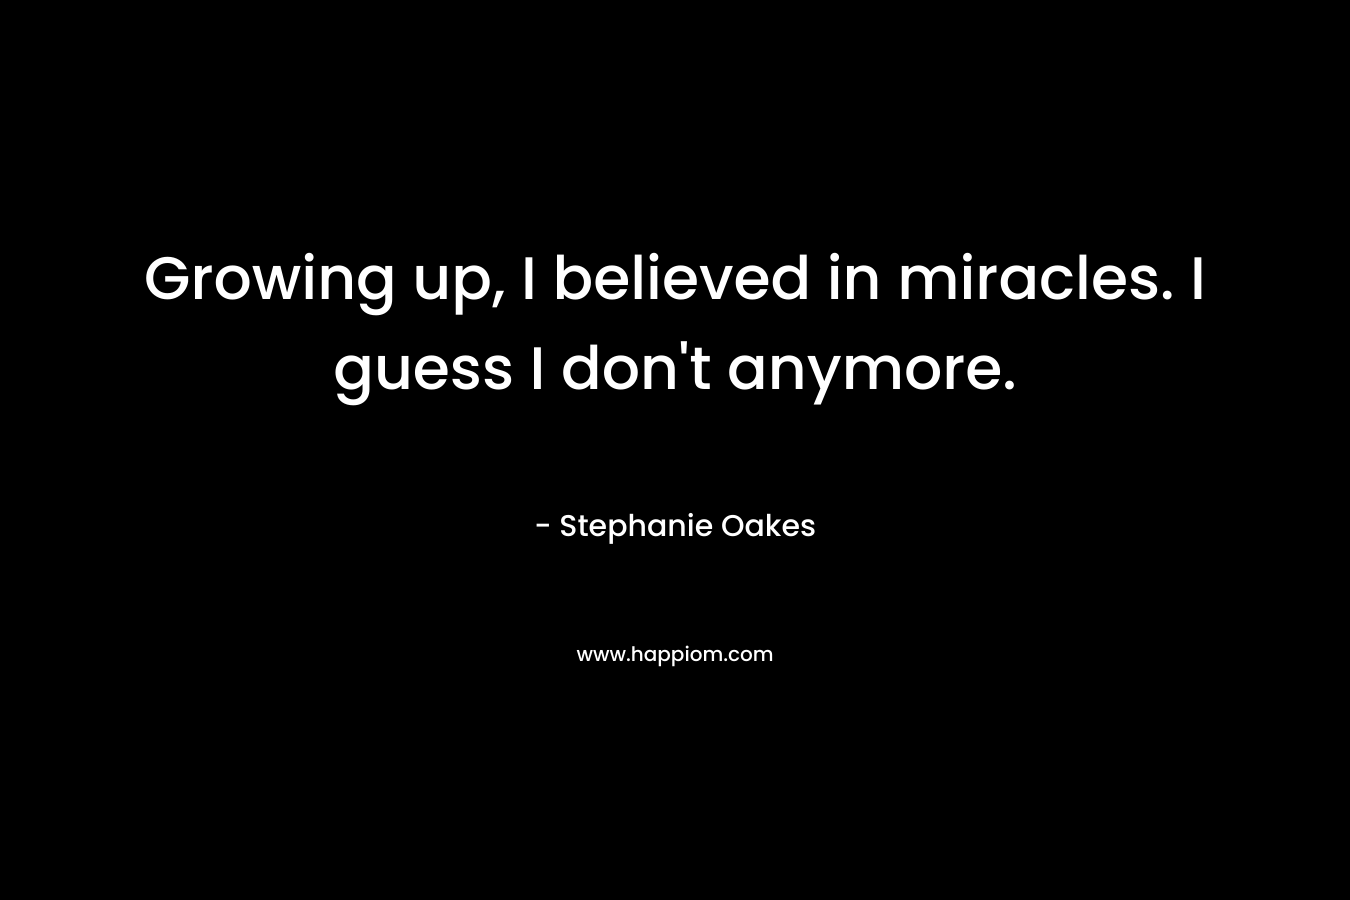 Growing up, I believed in miracles. I guess I don’t anymore. – Stephanie Oakes